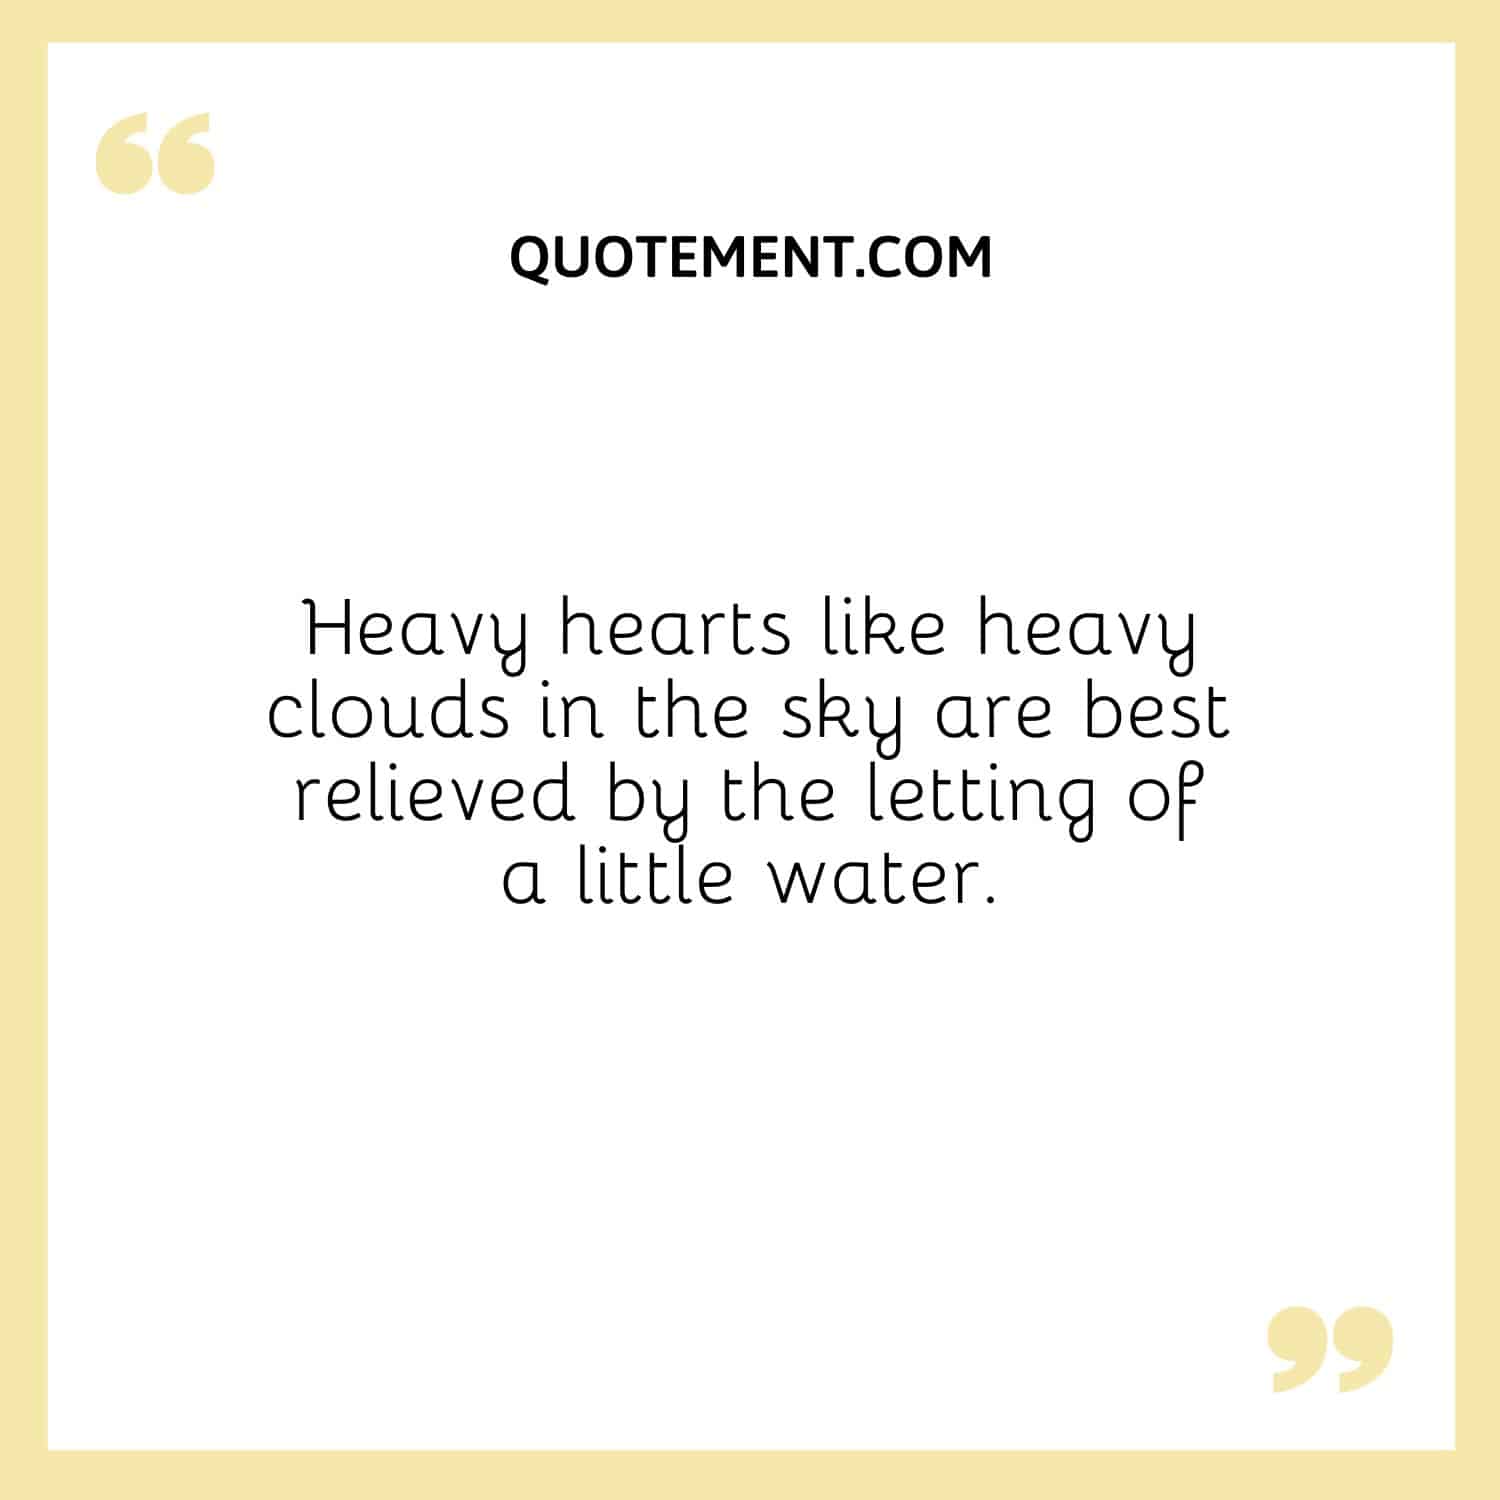 Heavy hearts like heavy clouds in the sky are best relieved by the letting of a little water.